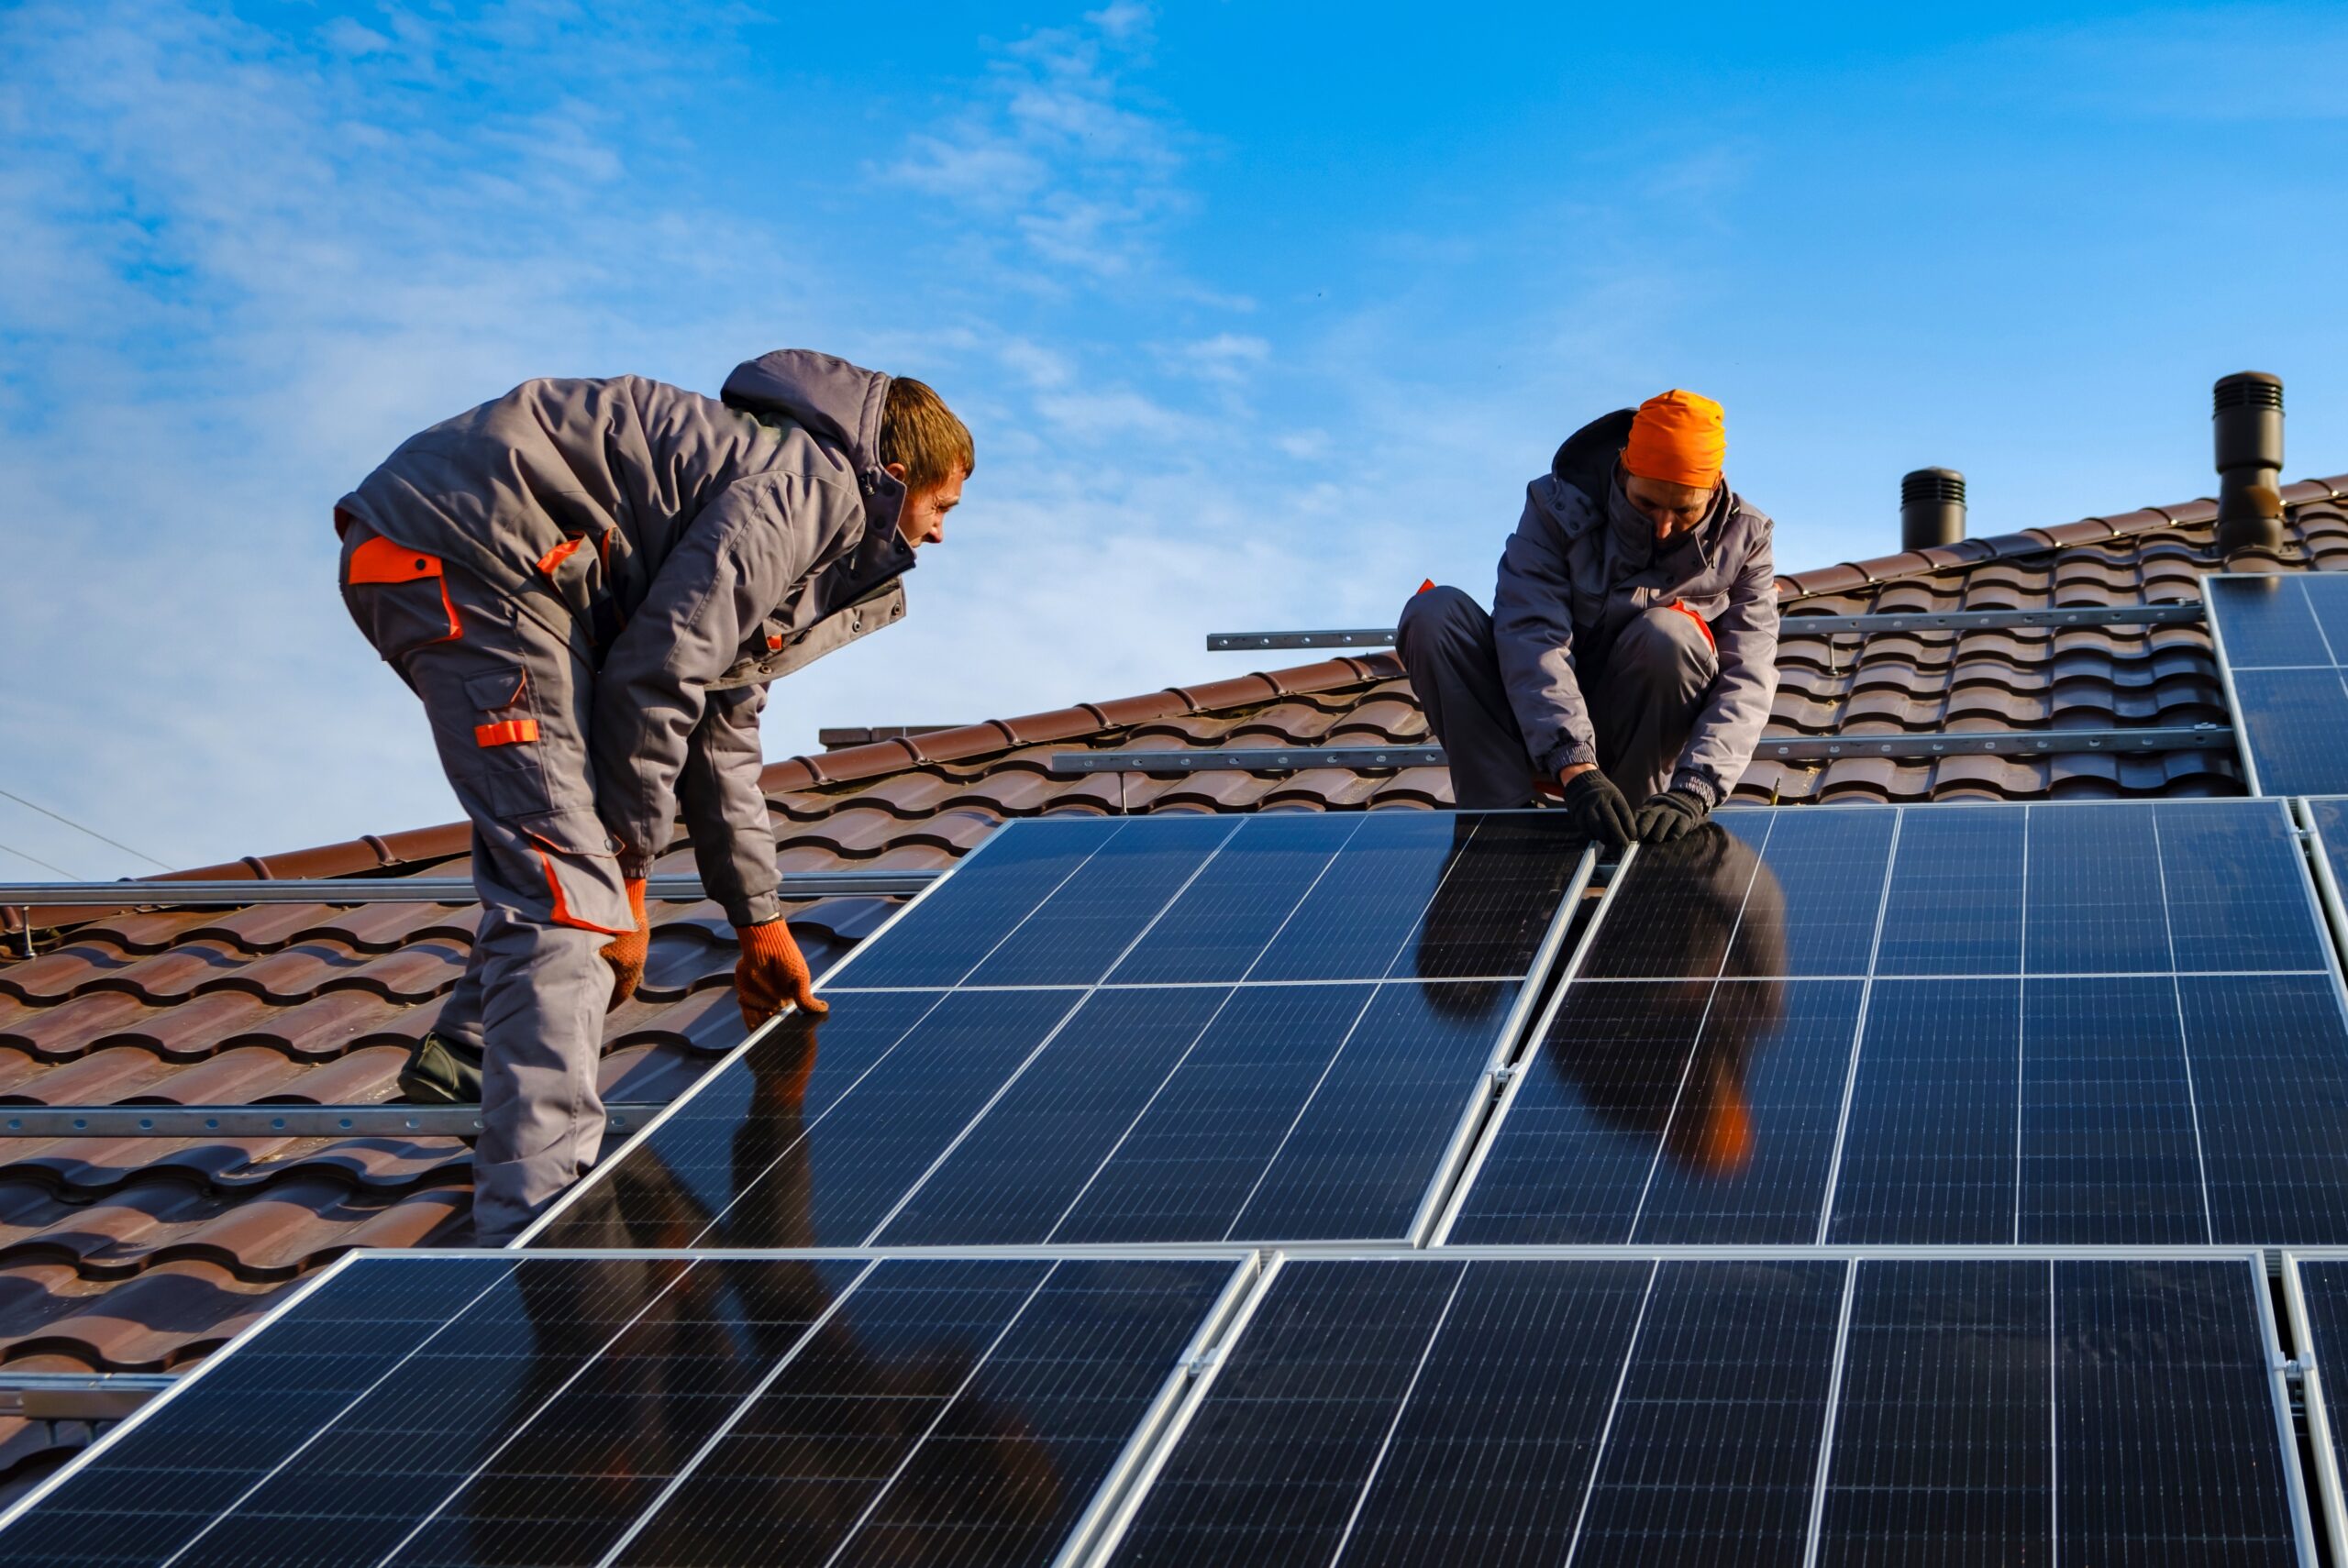 Installing,A,Solar,Cell,On,A,Roof.,Solar,Panels,On